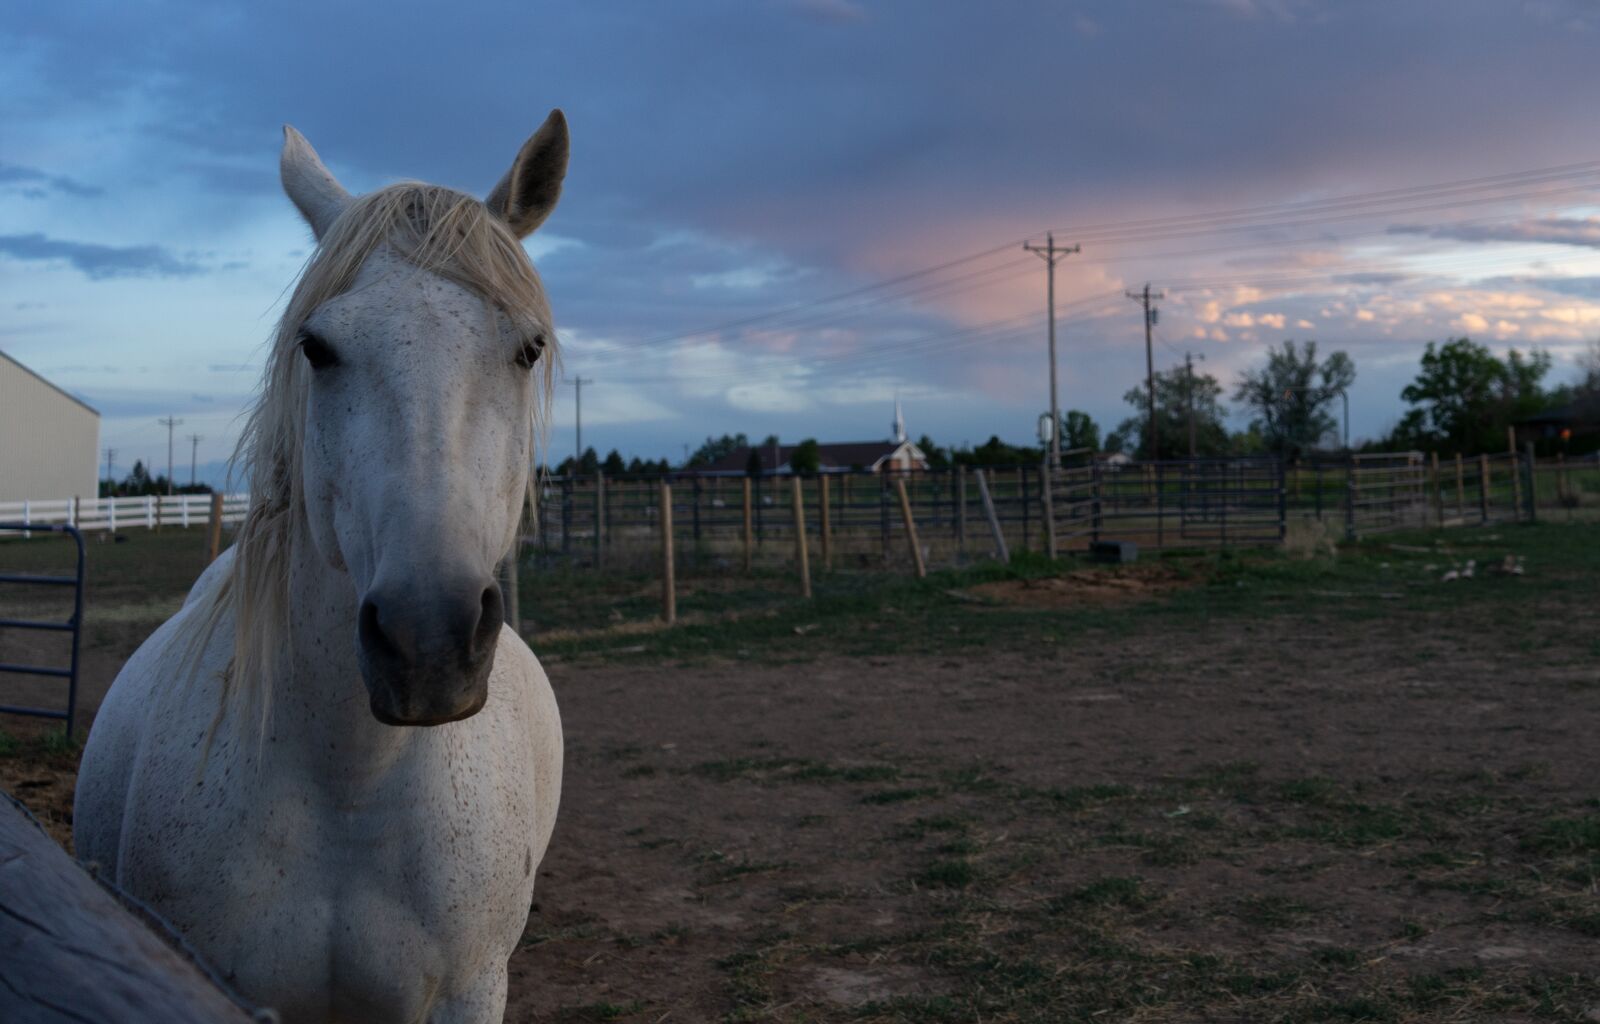 Sony a7 II + Sony FE 28-70mm F3.5-5.6 OSS sample photo. Horse, evening, pasture photography